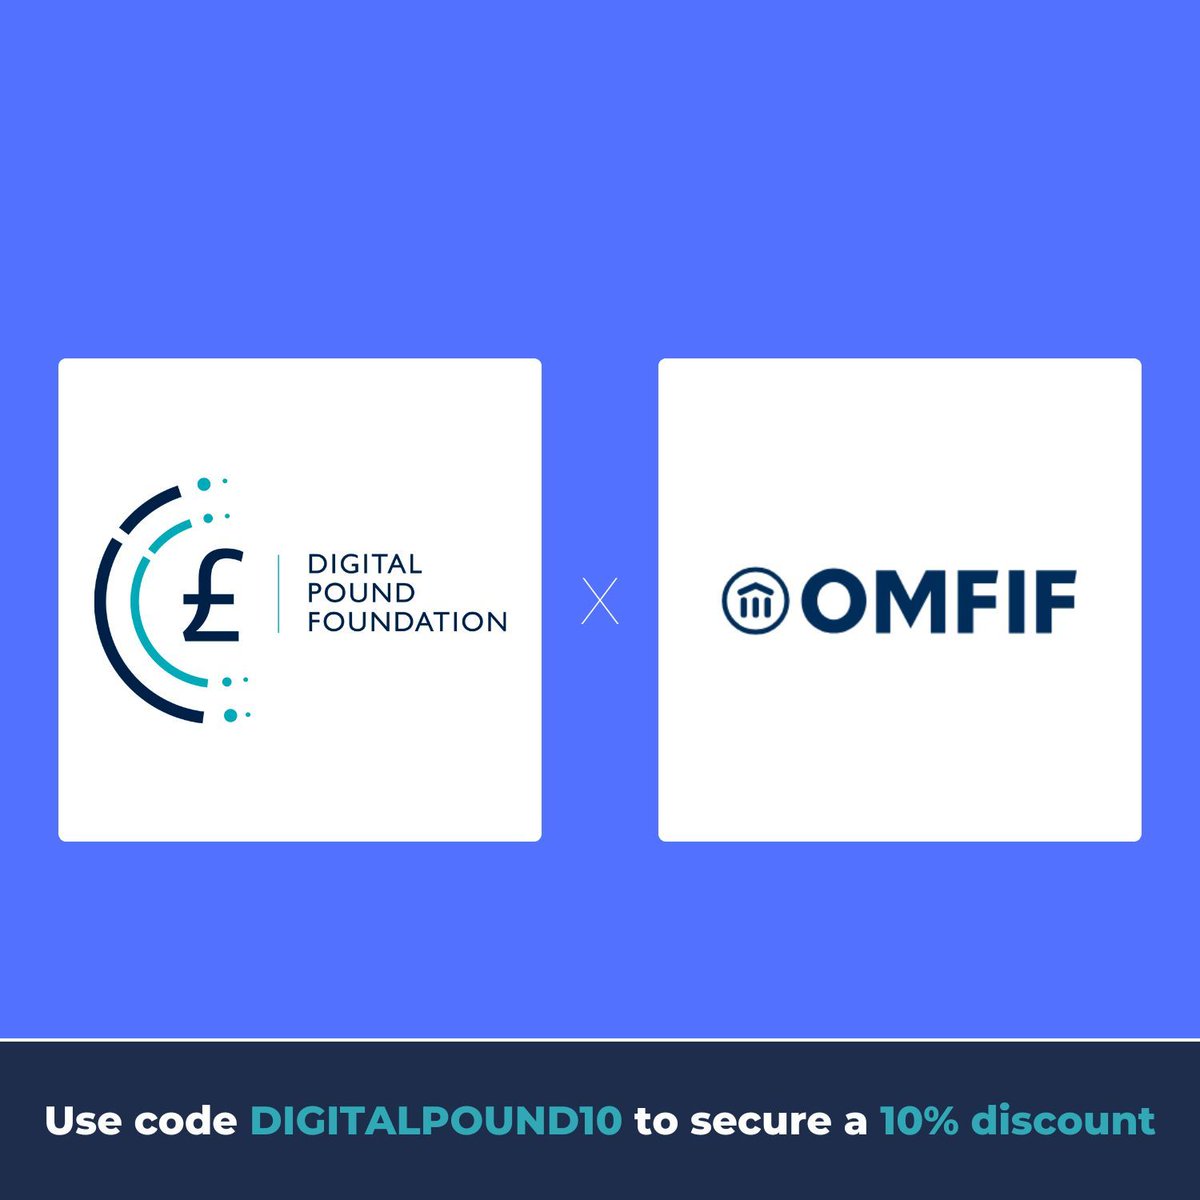 Have you booked your tickets for next week's @OMFIF Digital Money Summit? Don't forget, you can receive a 10% discount on tickets when using the promo code 'digitalpound10' at checkout 👉 buff.ly/3TDhsLz ... #DigitalMoney #DigitalCurrenies #Fintech #Conference #Event